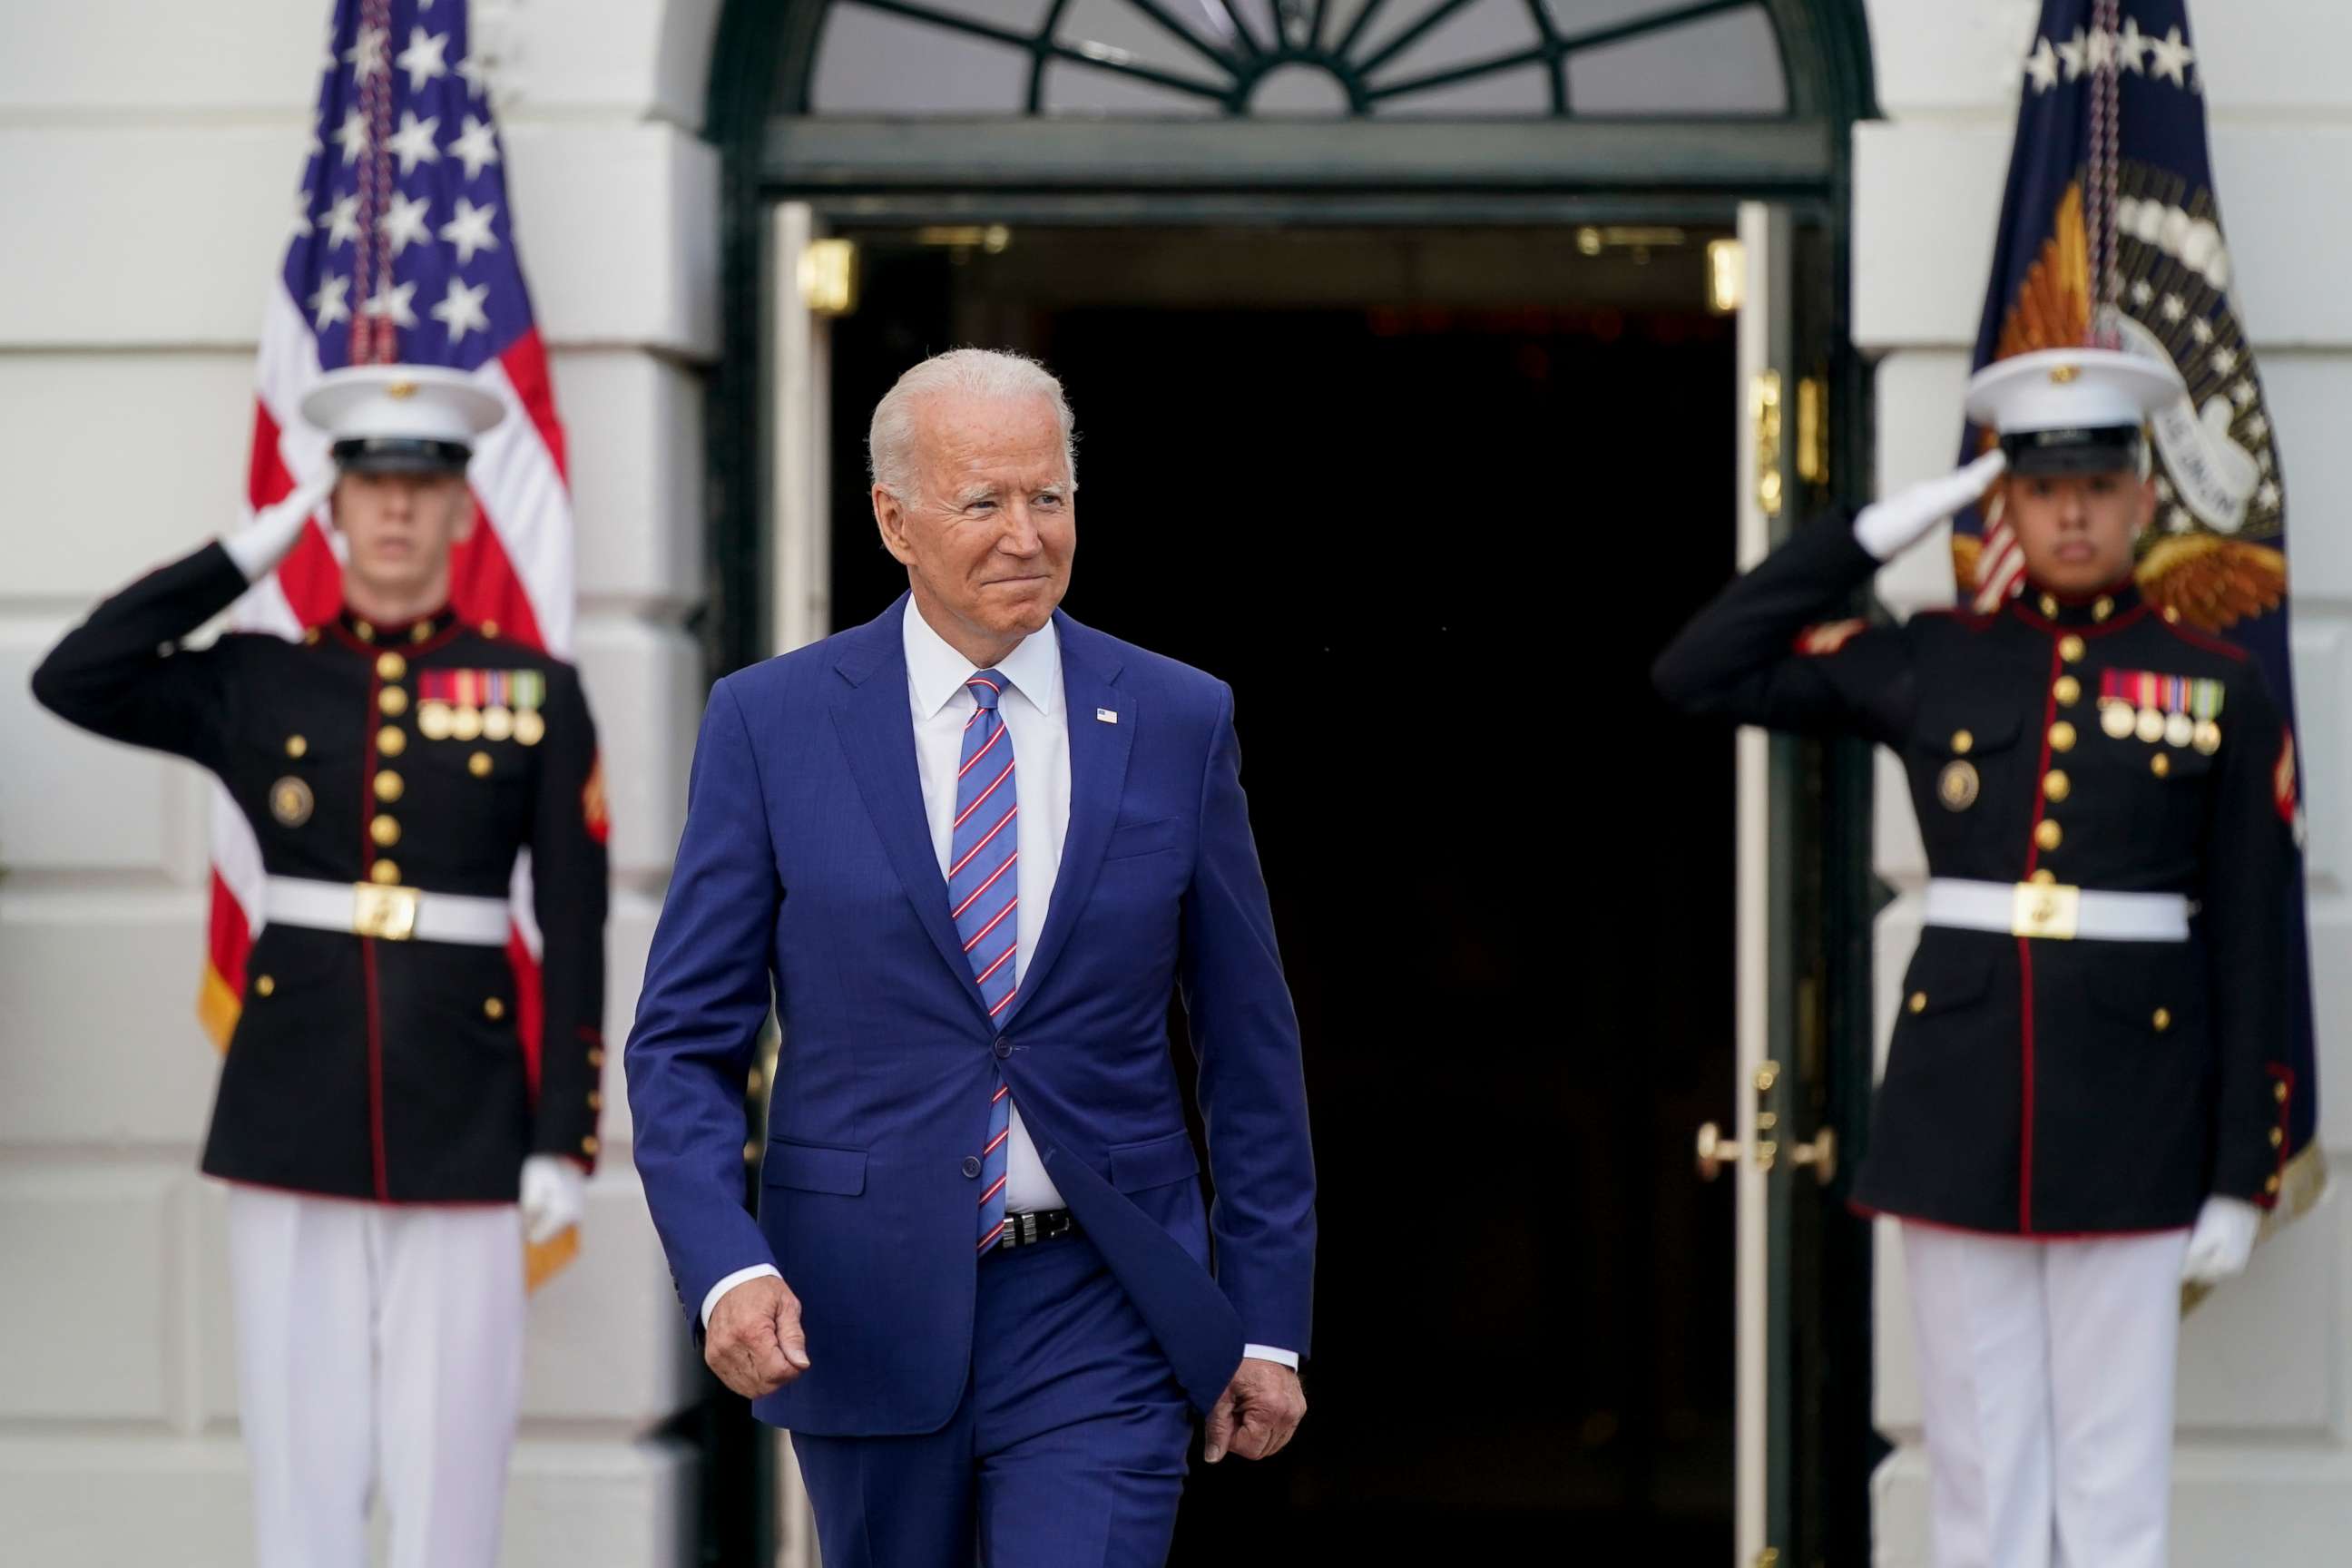 Biden's sway stays tied to COVID recovery: The Note - ABC News